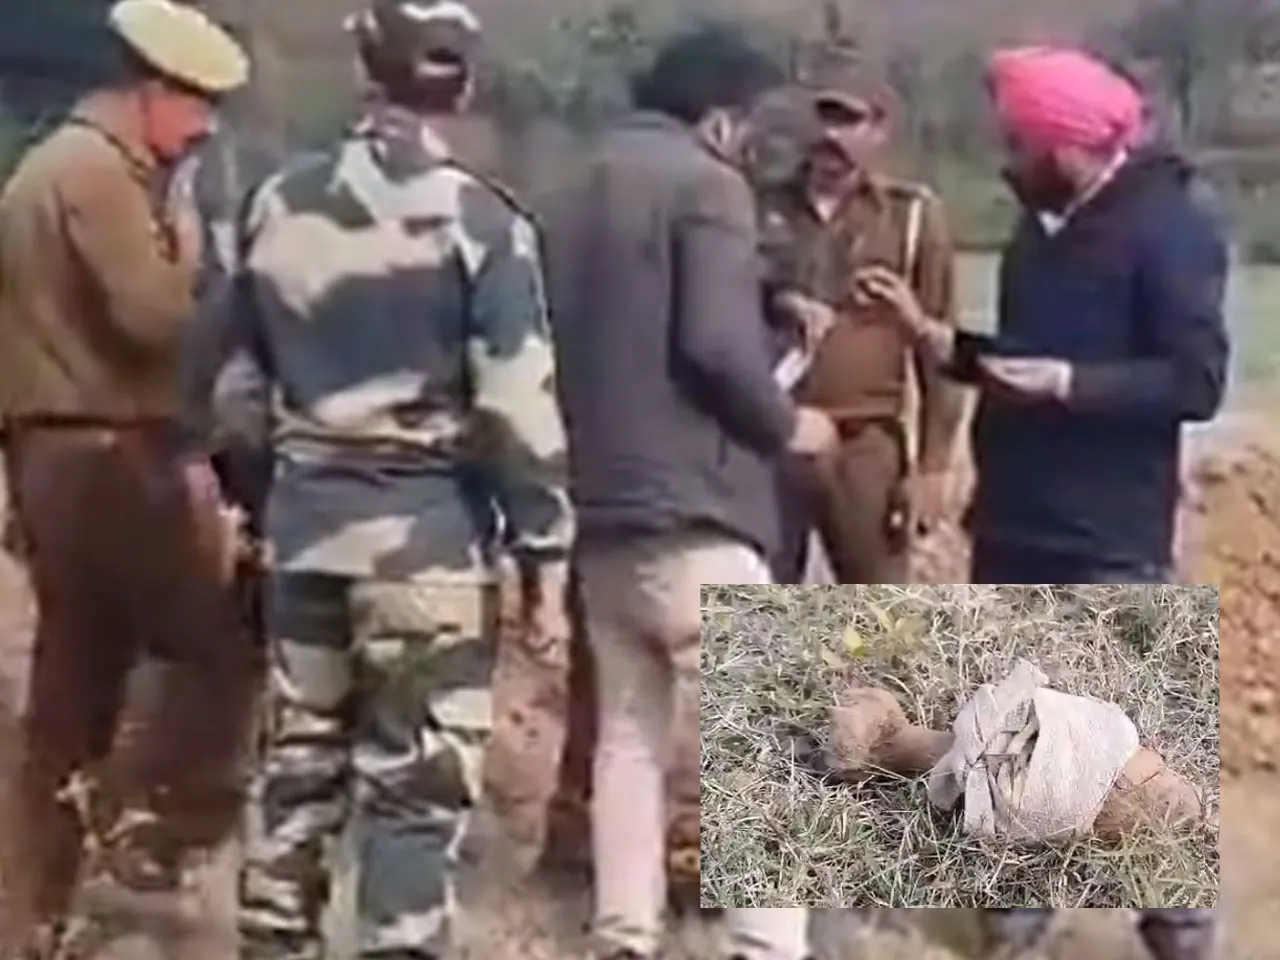 Mortar shell recovered, border police started investigation